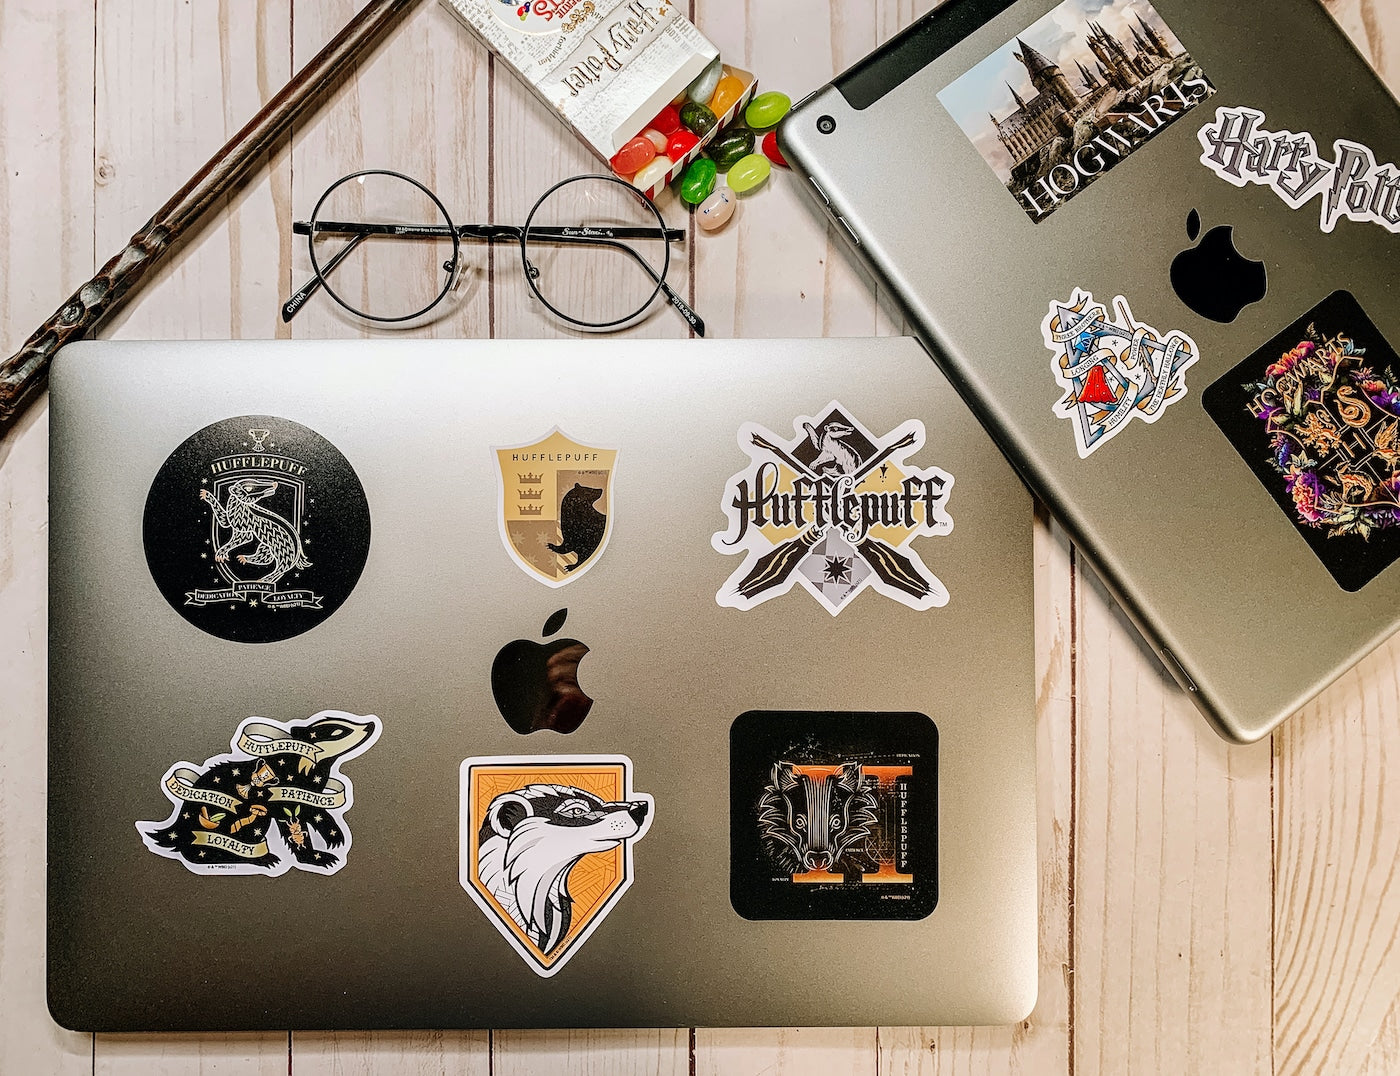 Harry Potter Hufflepuff Decals (50-Pack)